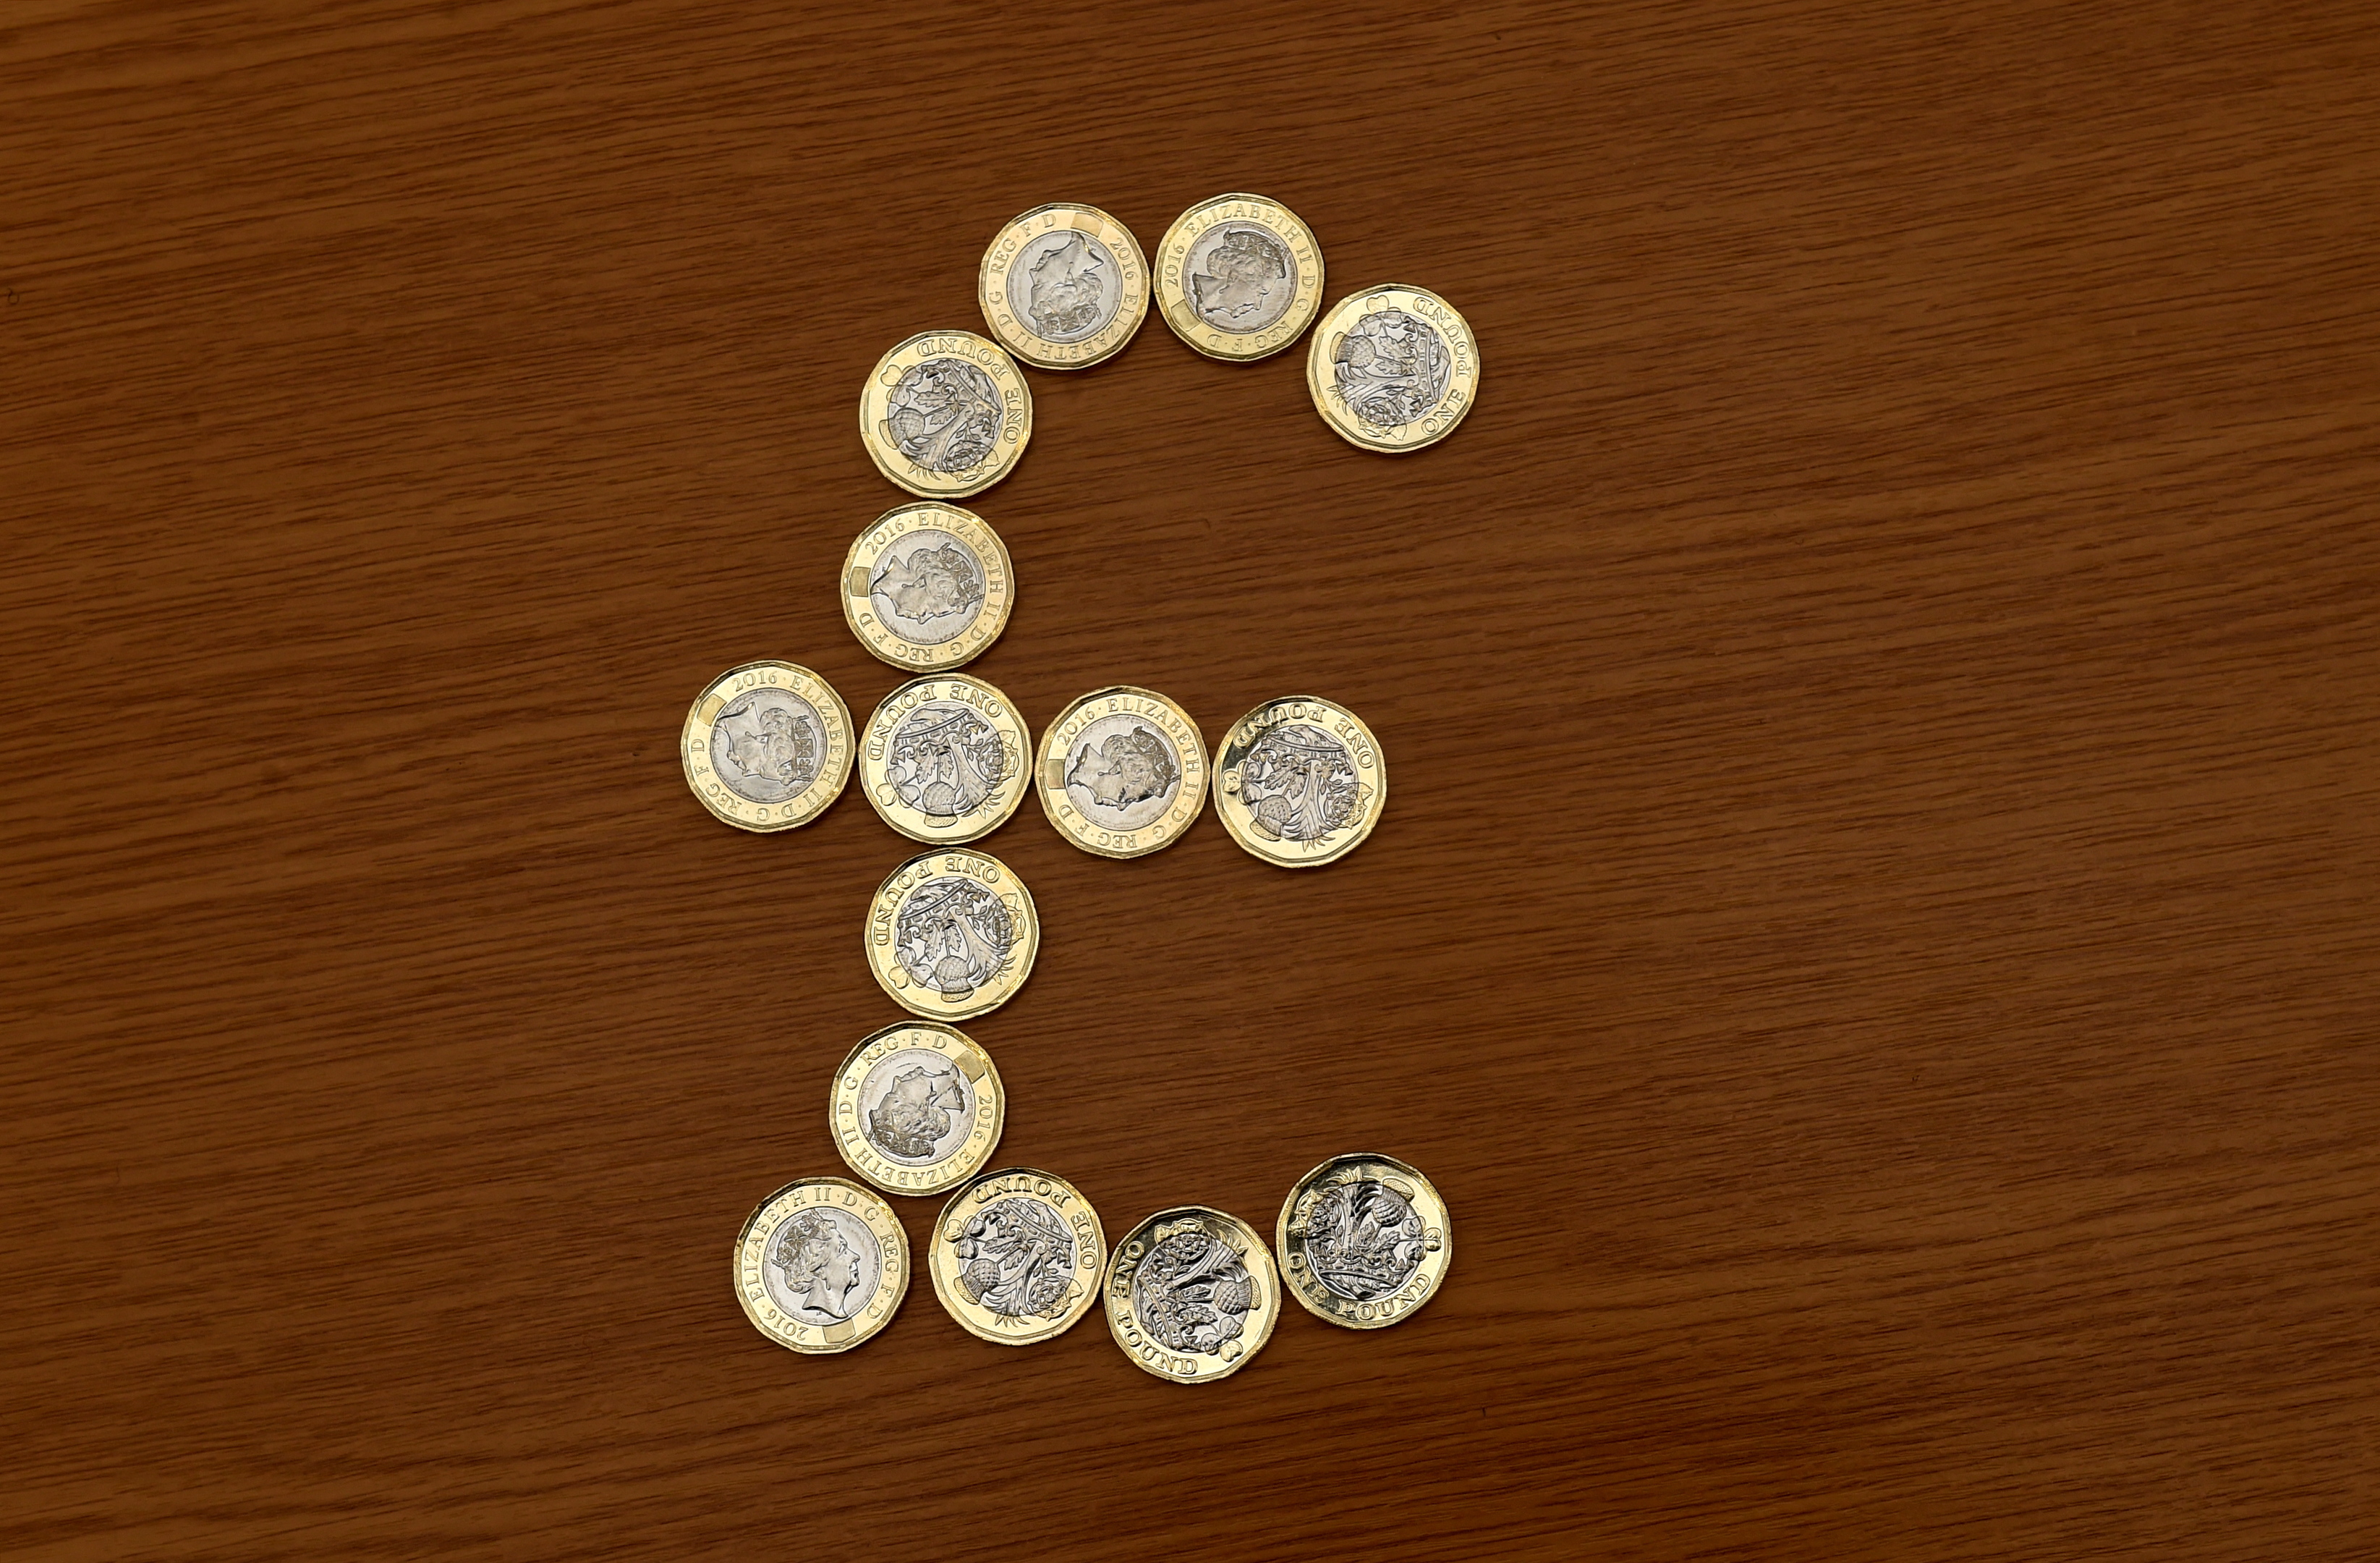 Only the new £1 coin will be legal tender after Sunday (Darrell Benns / DC Thomson)